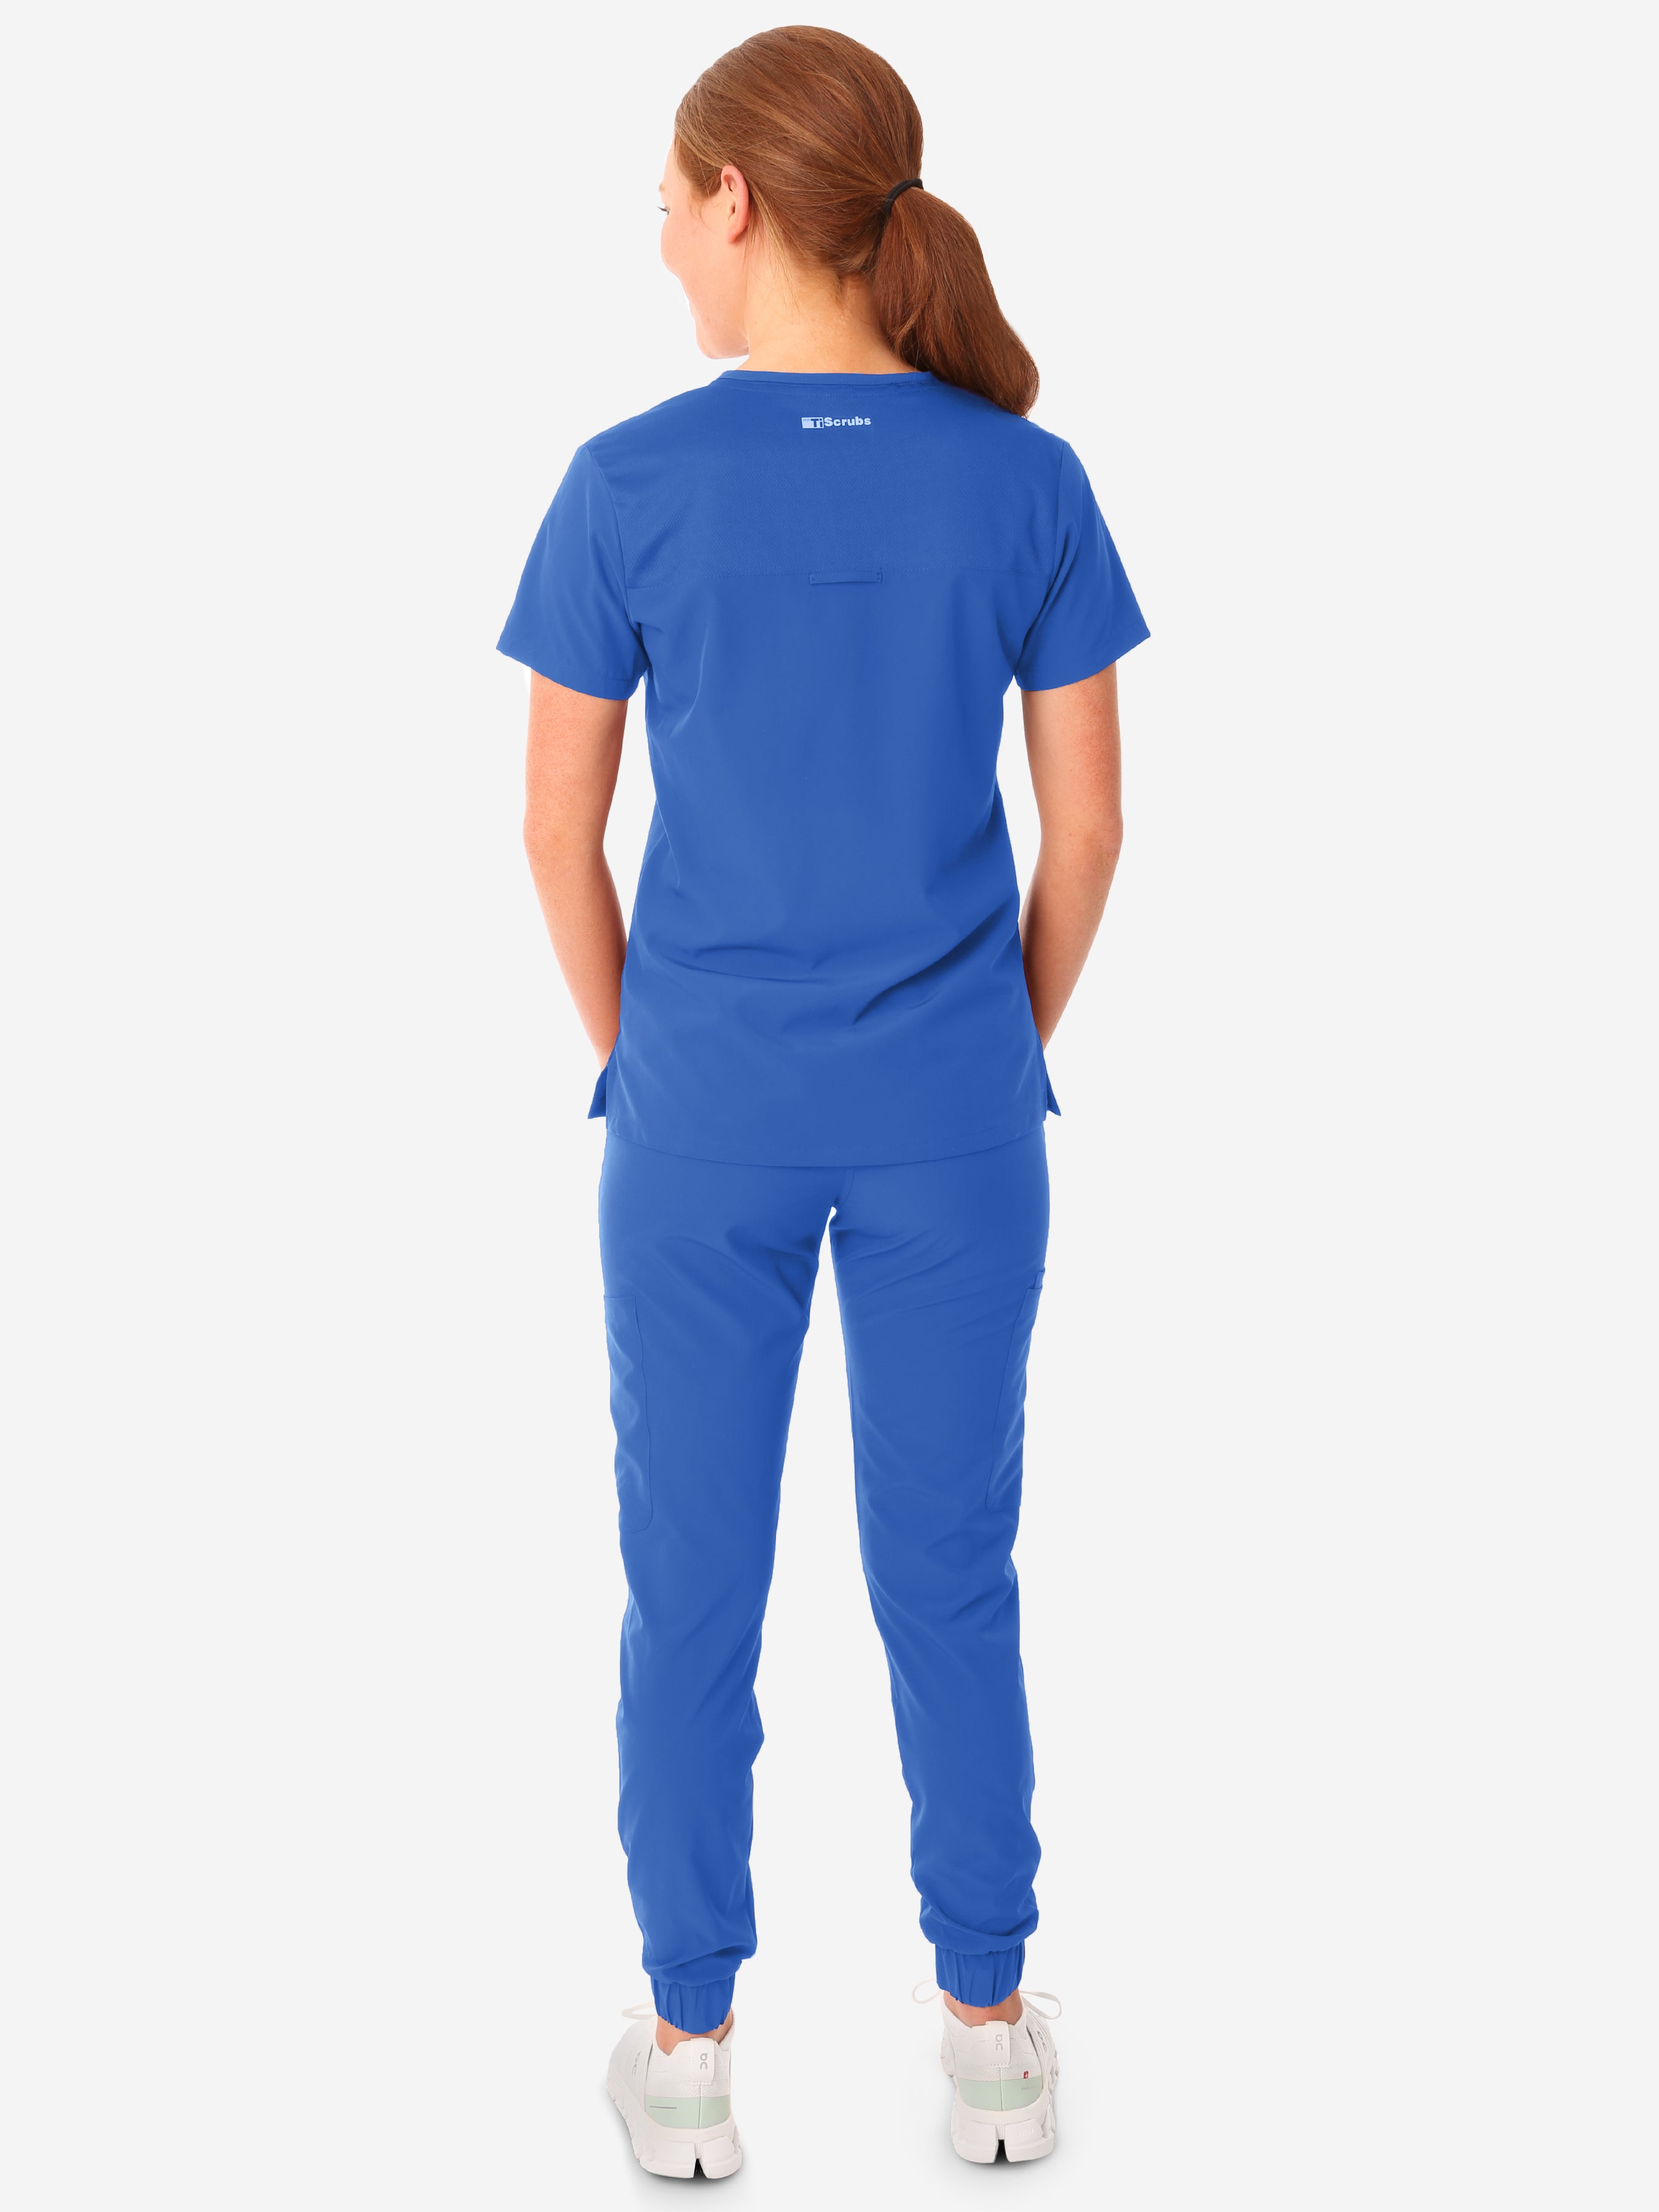 TiScrubs Women&#39;s Stretch Royal Blue One-Pocket Scrub Top Untucked with Joggers Back View Full Body